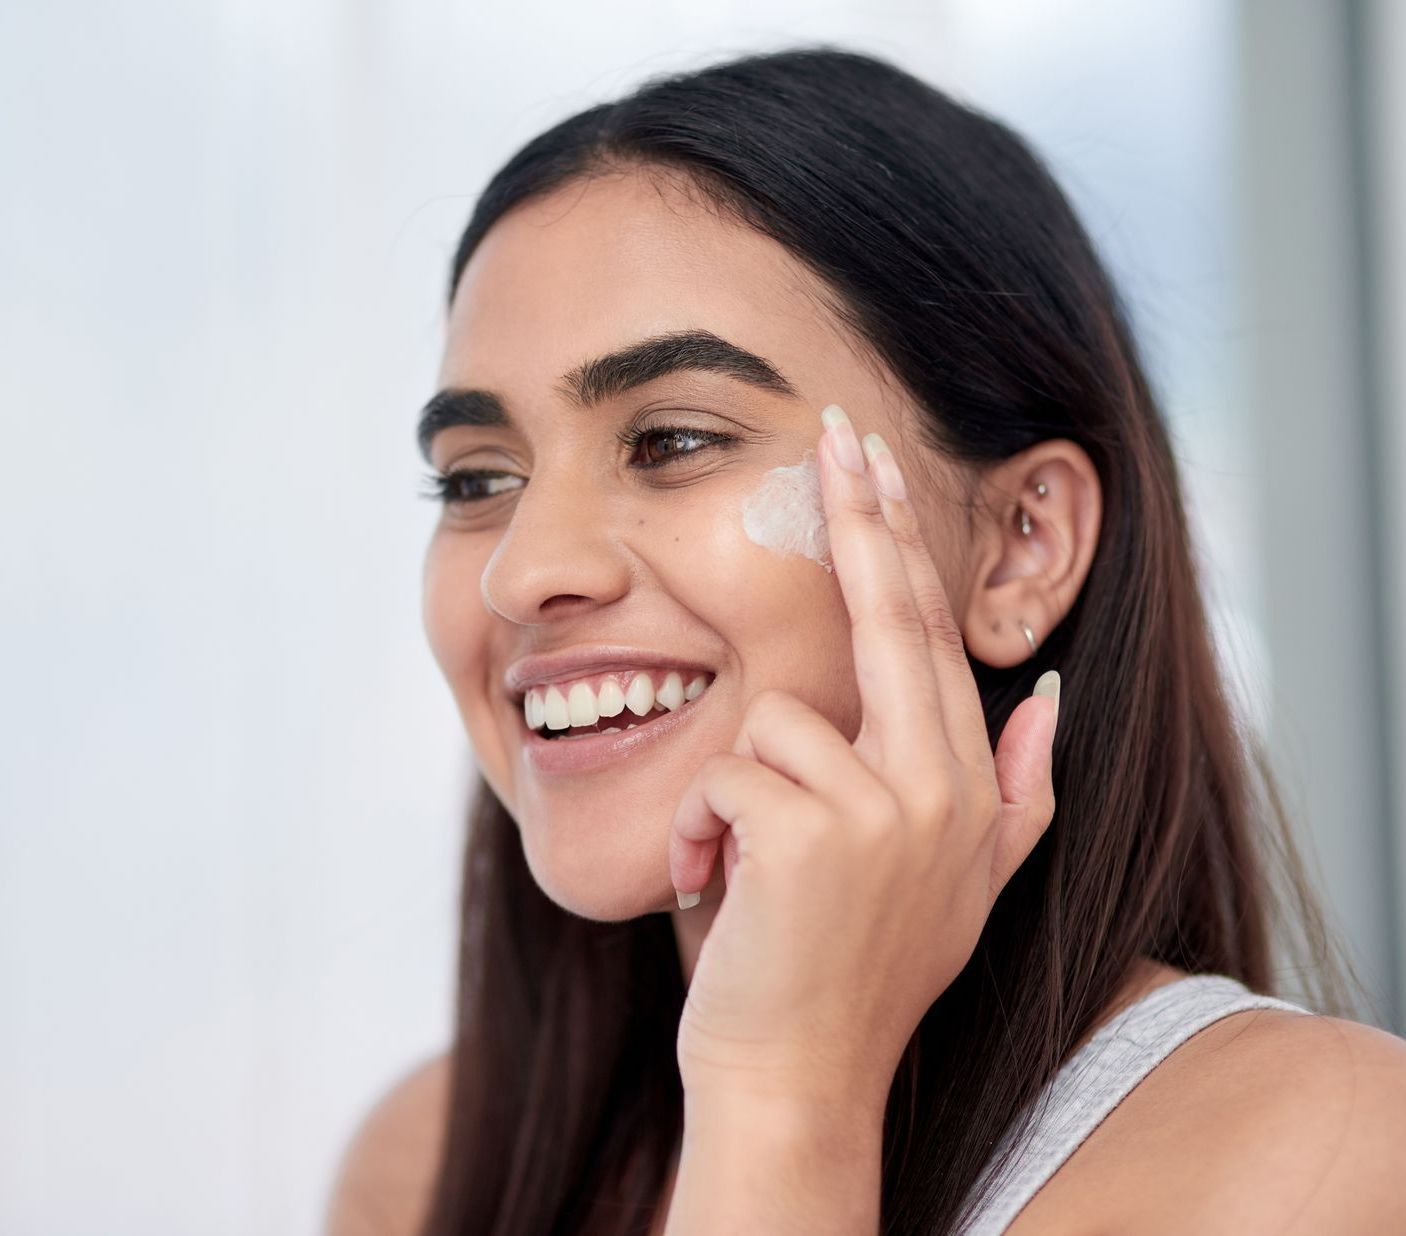 a woman is smiling while applying cream to her face